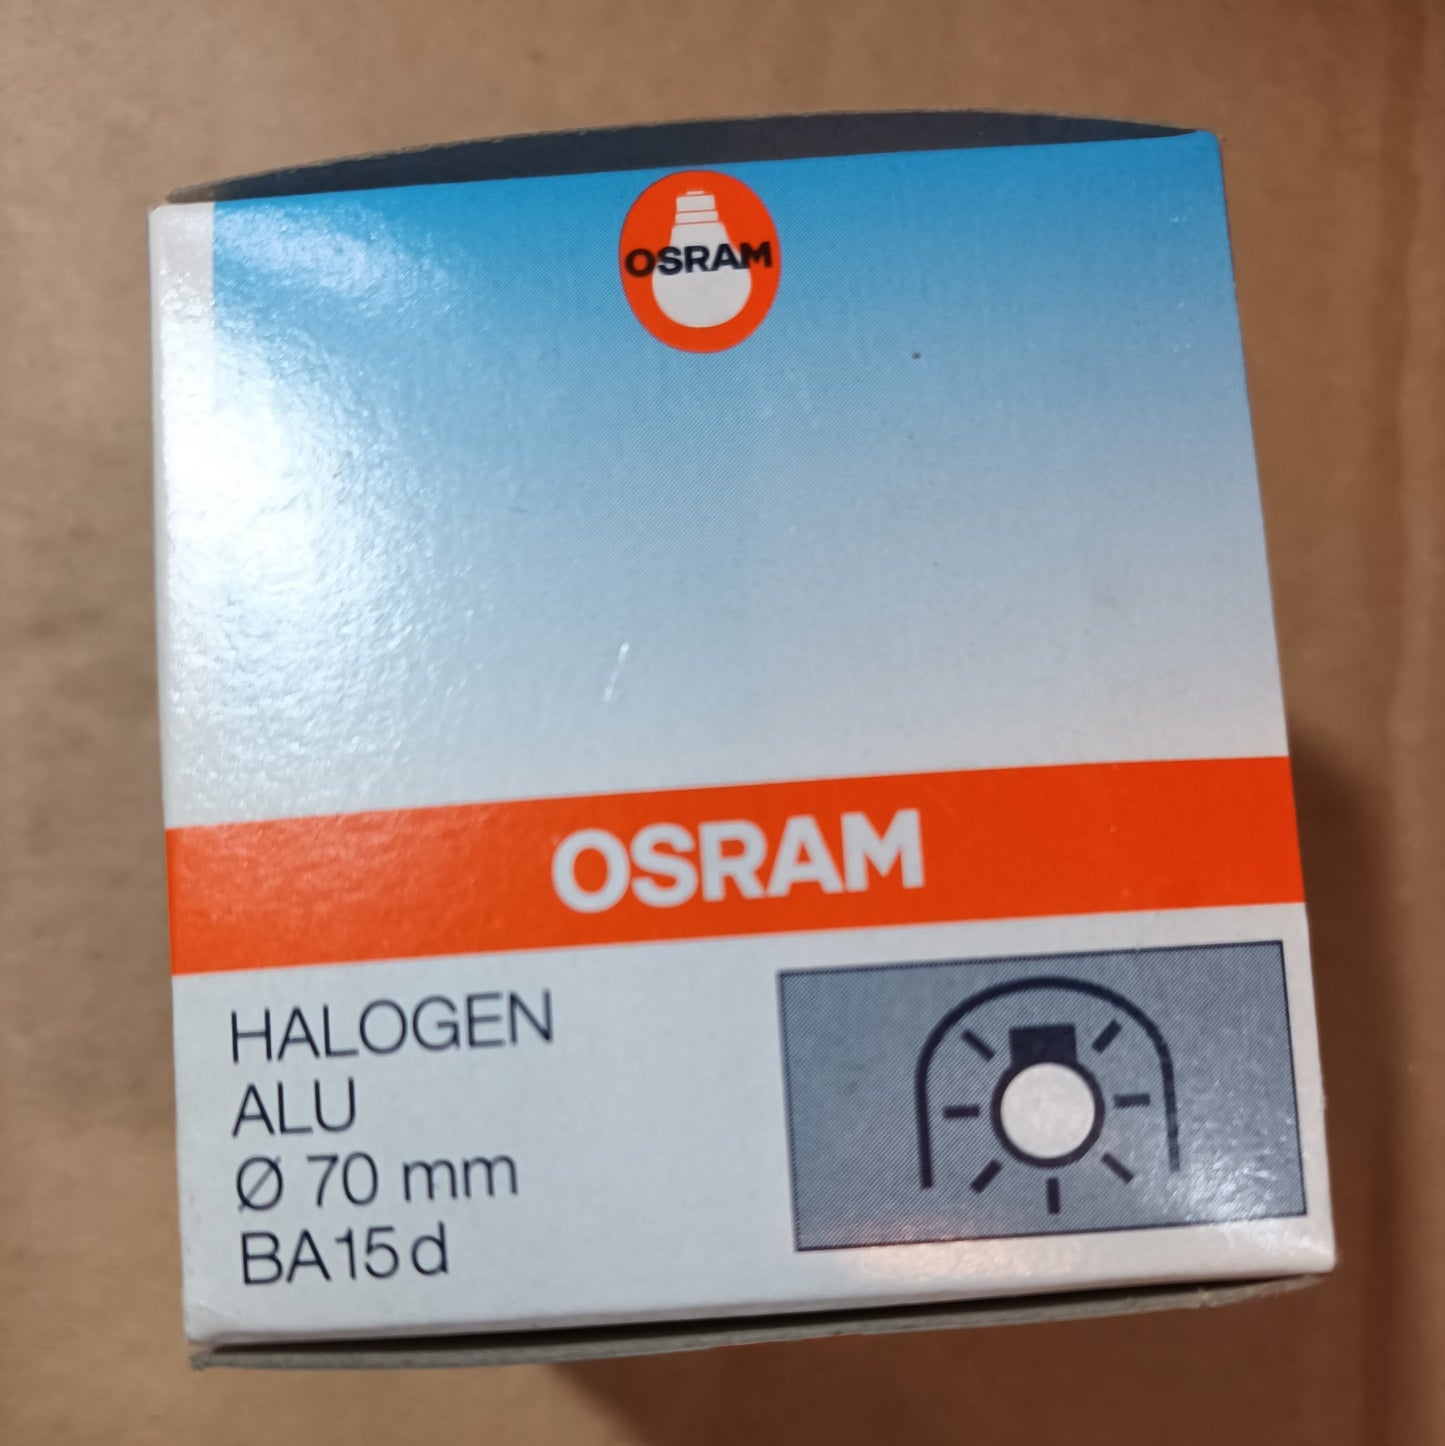 M158 Halospot 70 by Osram 50 Ws 12volt code 41990FL BA15d made in Germany